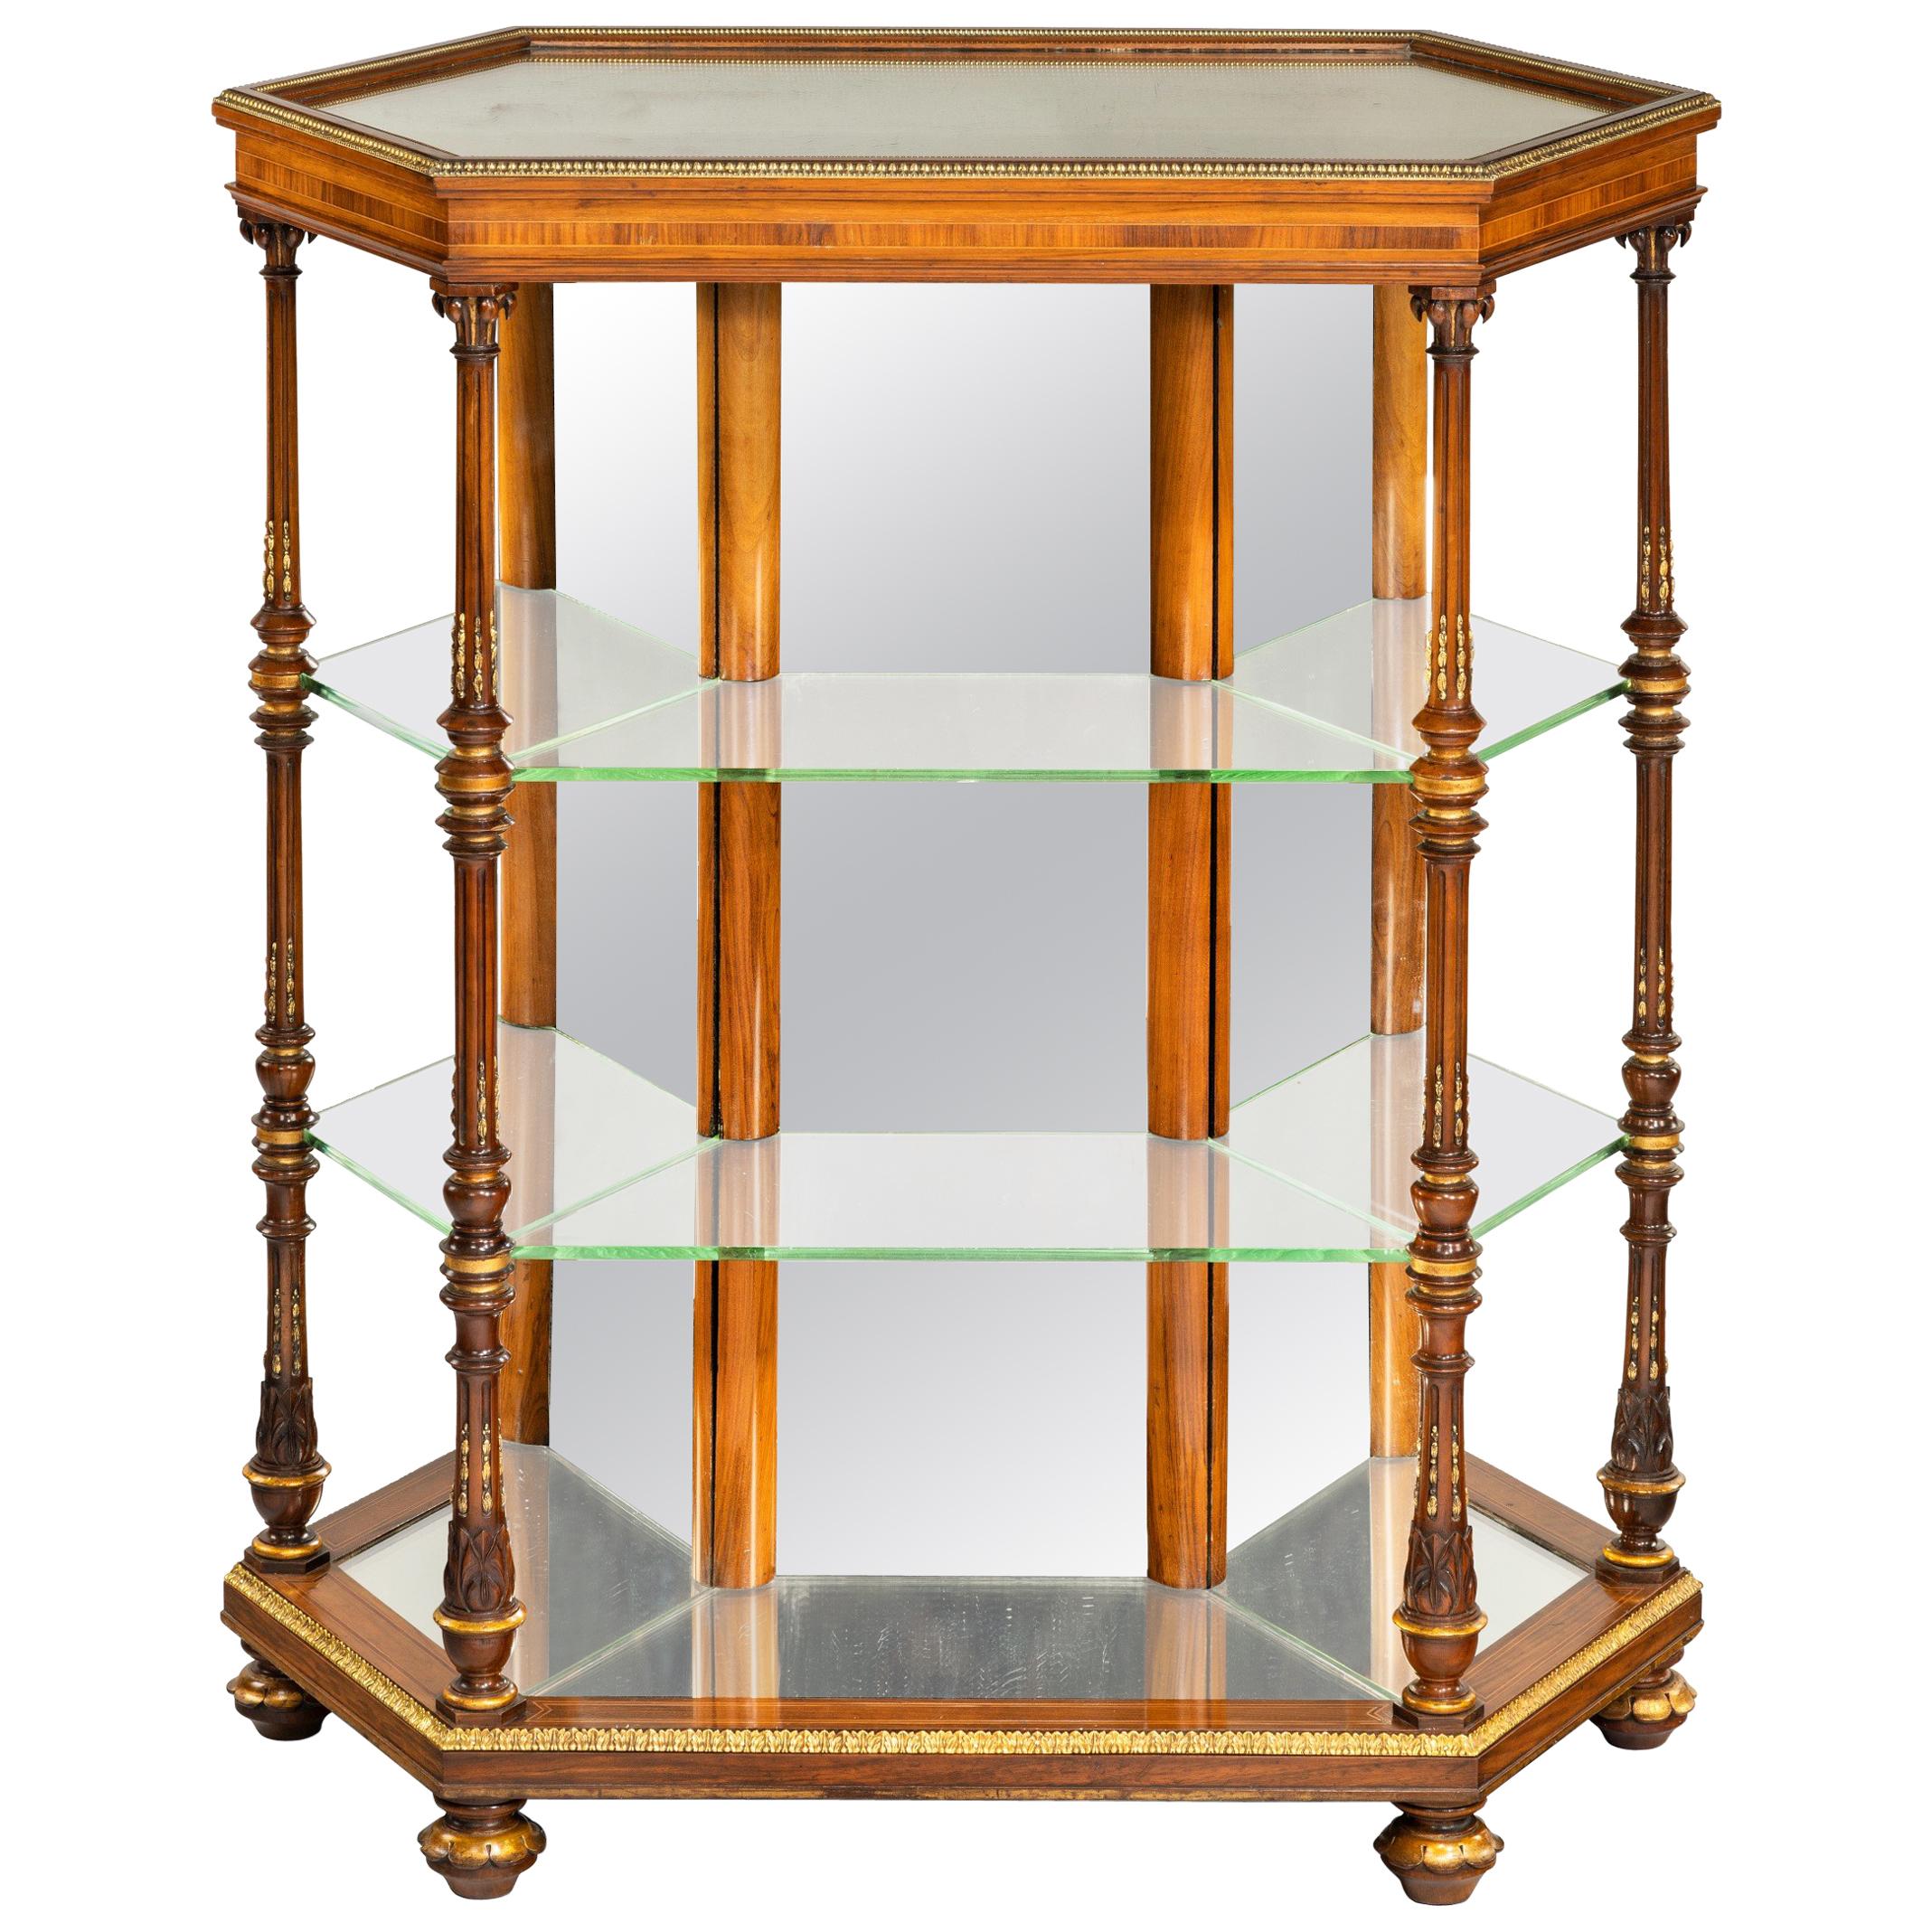 Antique Hexagonal Walnut Display Table Attributed to Holland and Sons